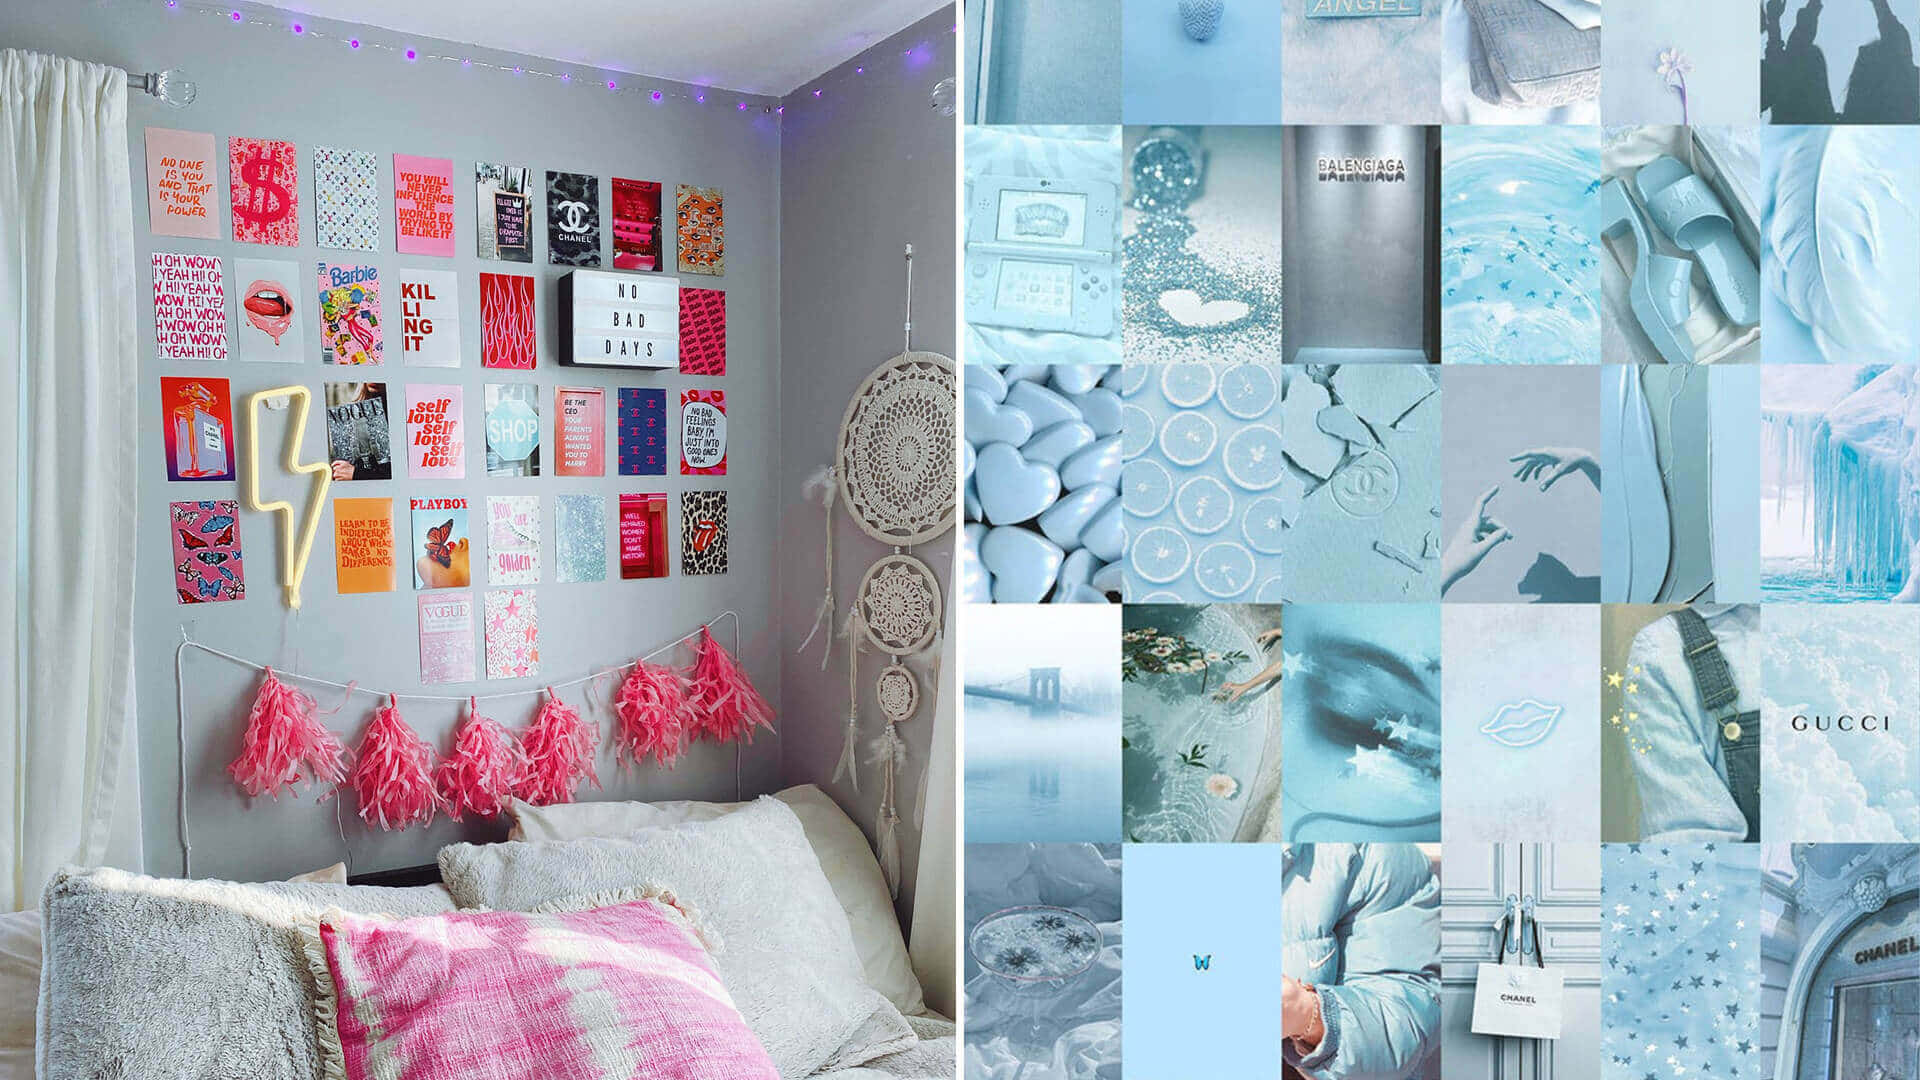 A Collage Of Pictures Of A Bedroom With Blue And White Decor